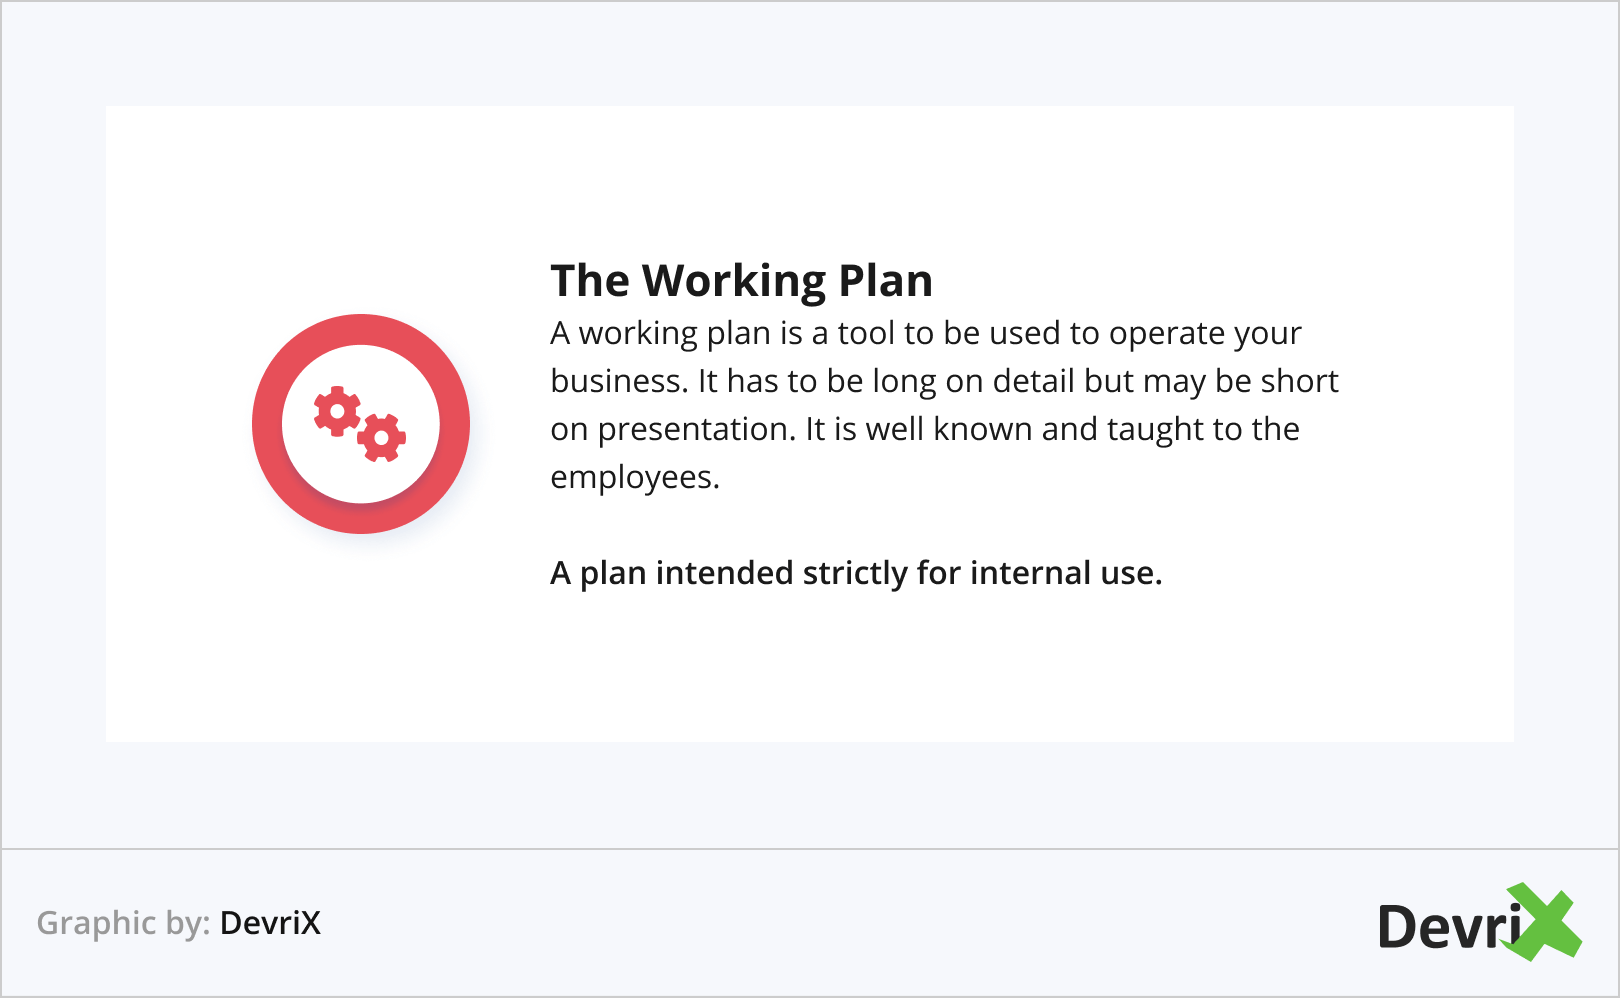 The Working Plan